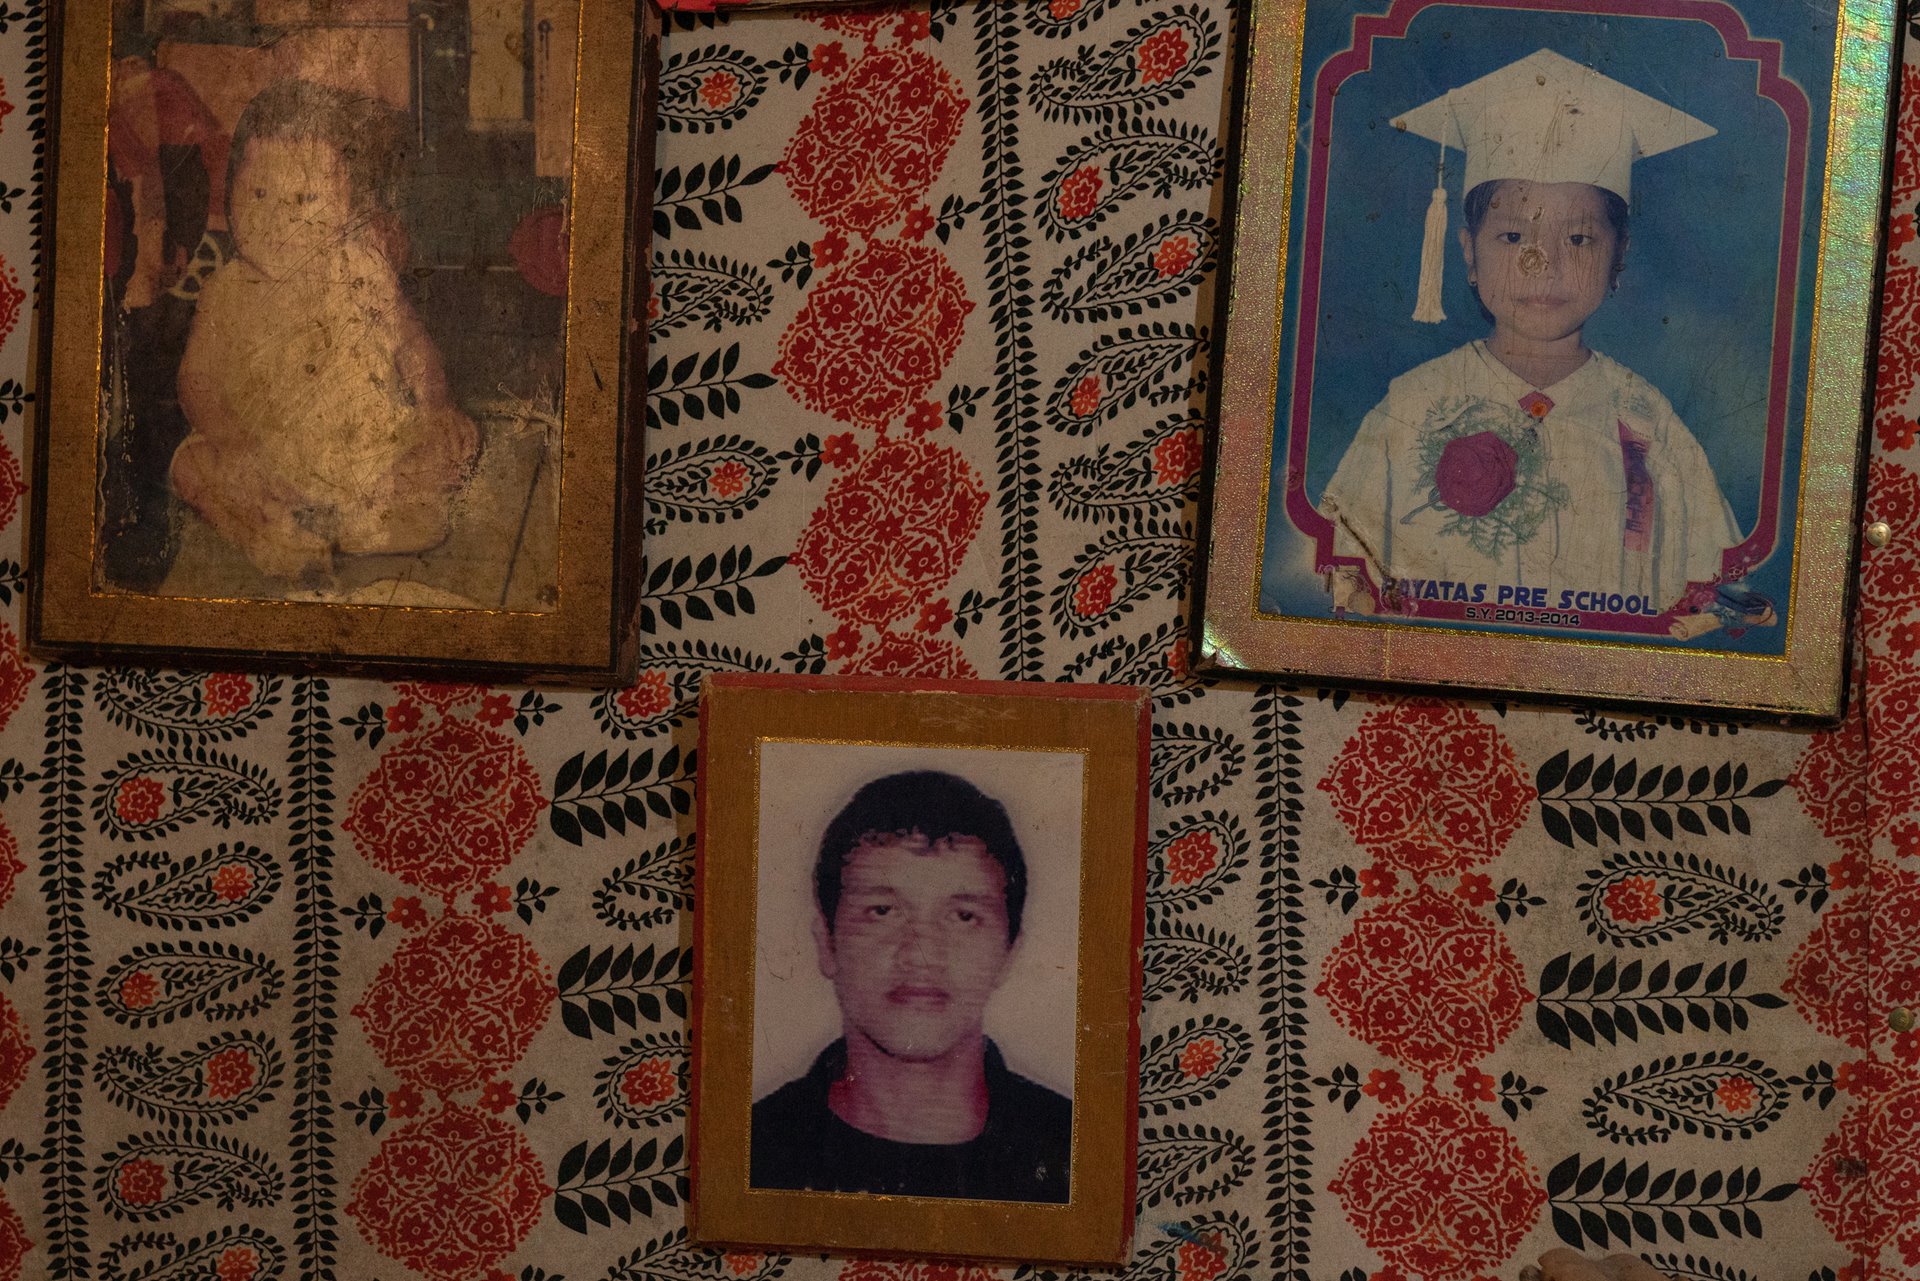 A portrait of Constantino de Juan is on display alongside those of children, at the family home in Payatas, Quezon City, the Philippines. He died during a police raid in December 2016, and his death certificate indicates he died of a heart attack.